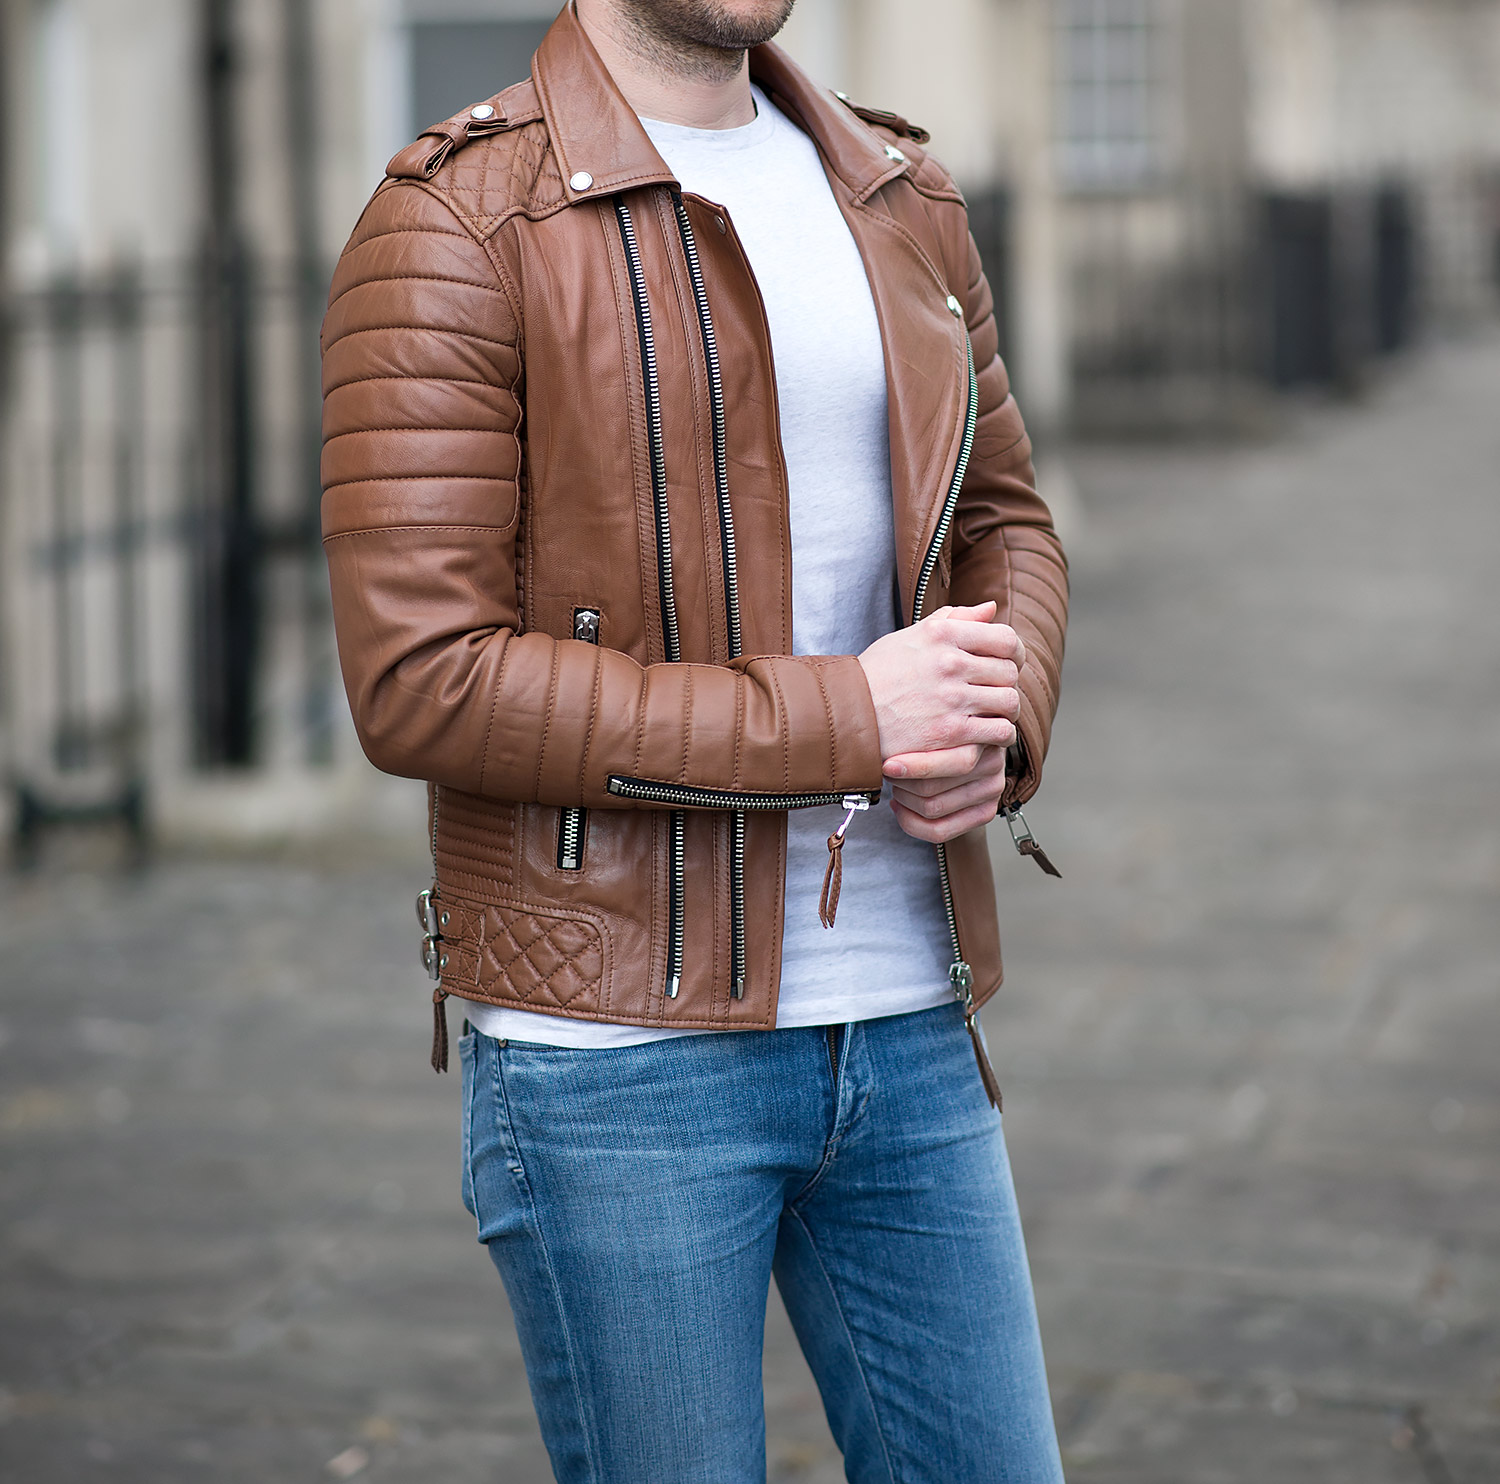 Boda Skins Kay Michaels Leather Jacket Review Your Average Guy